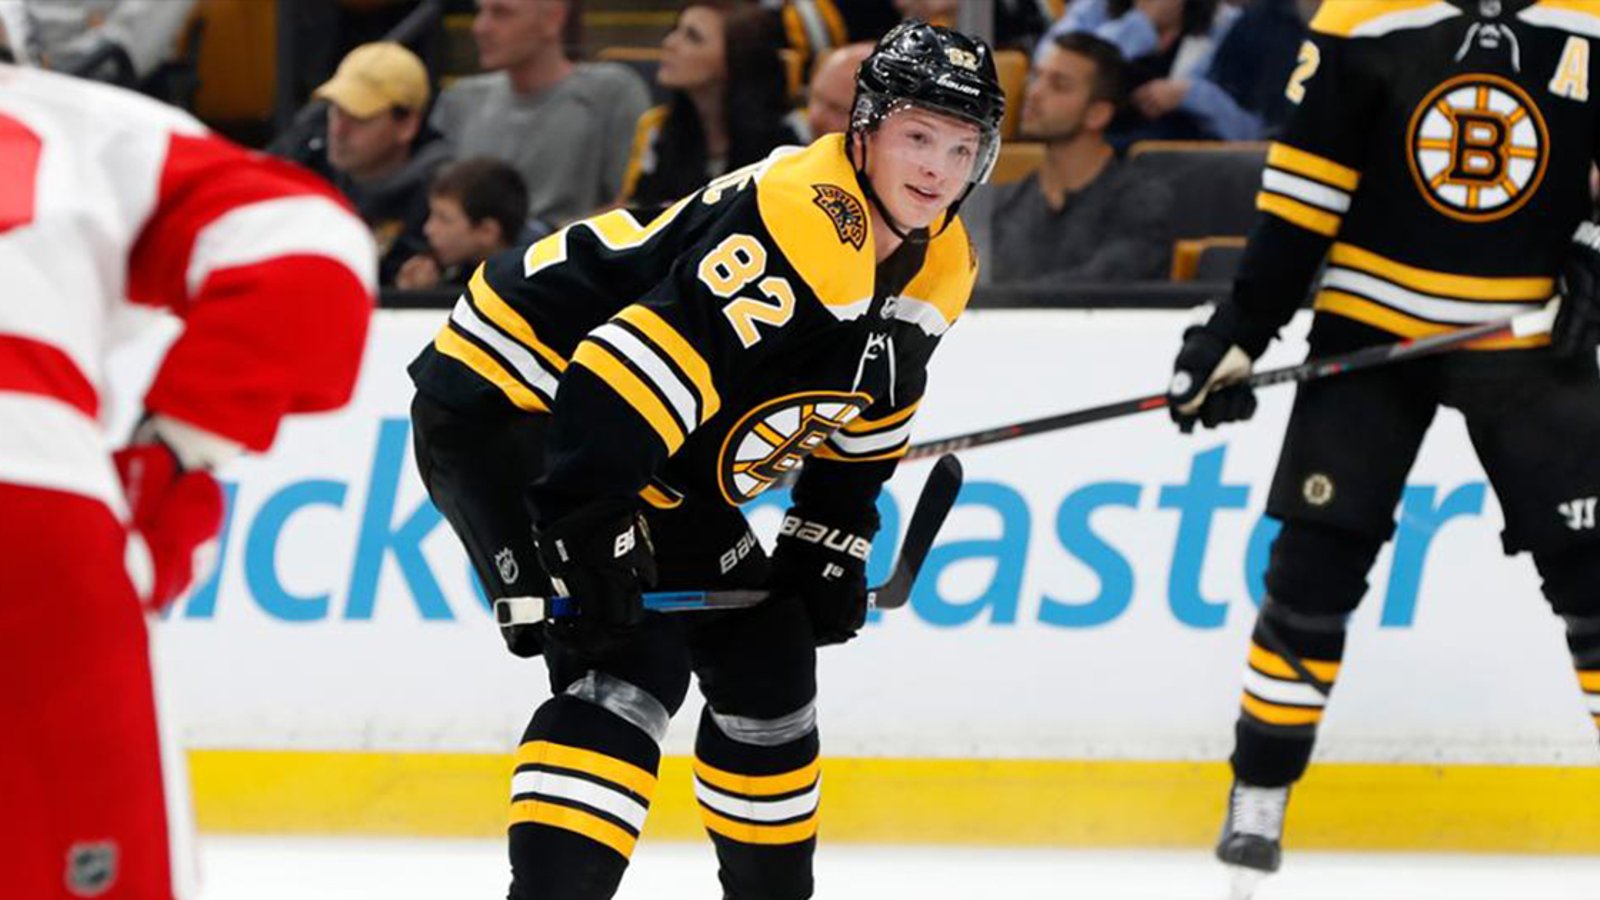 Bruins shuffle lines ahead of big game against Jets